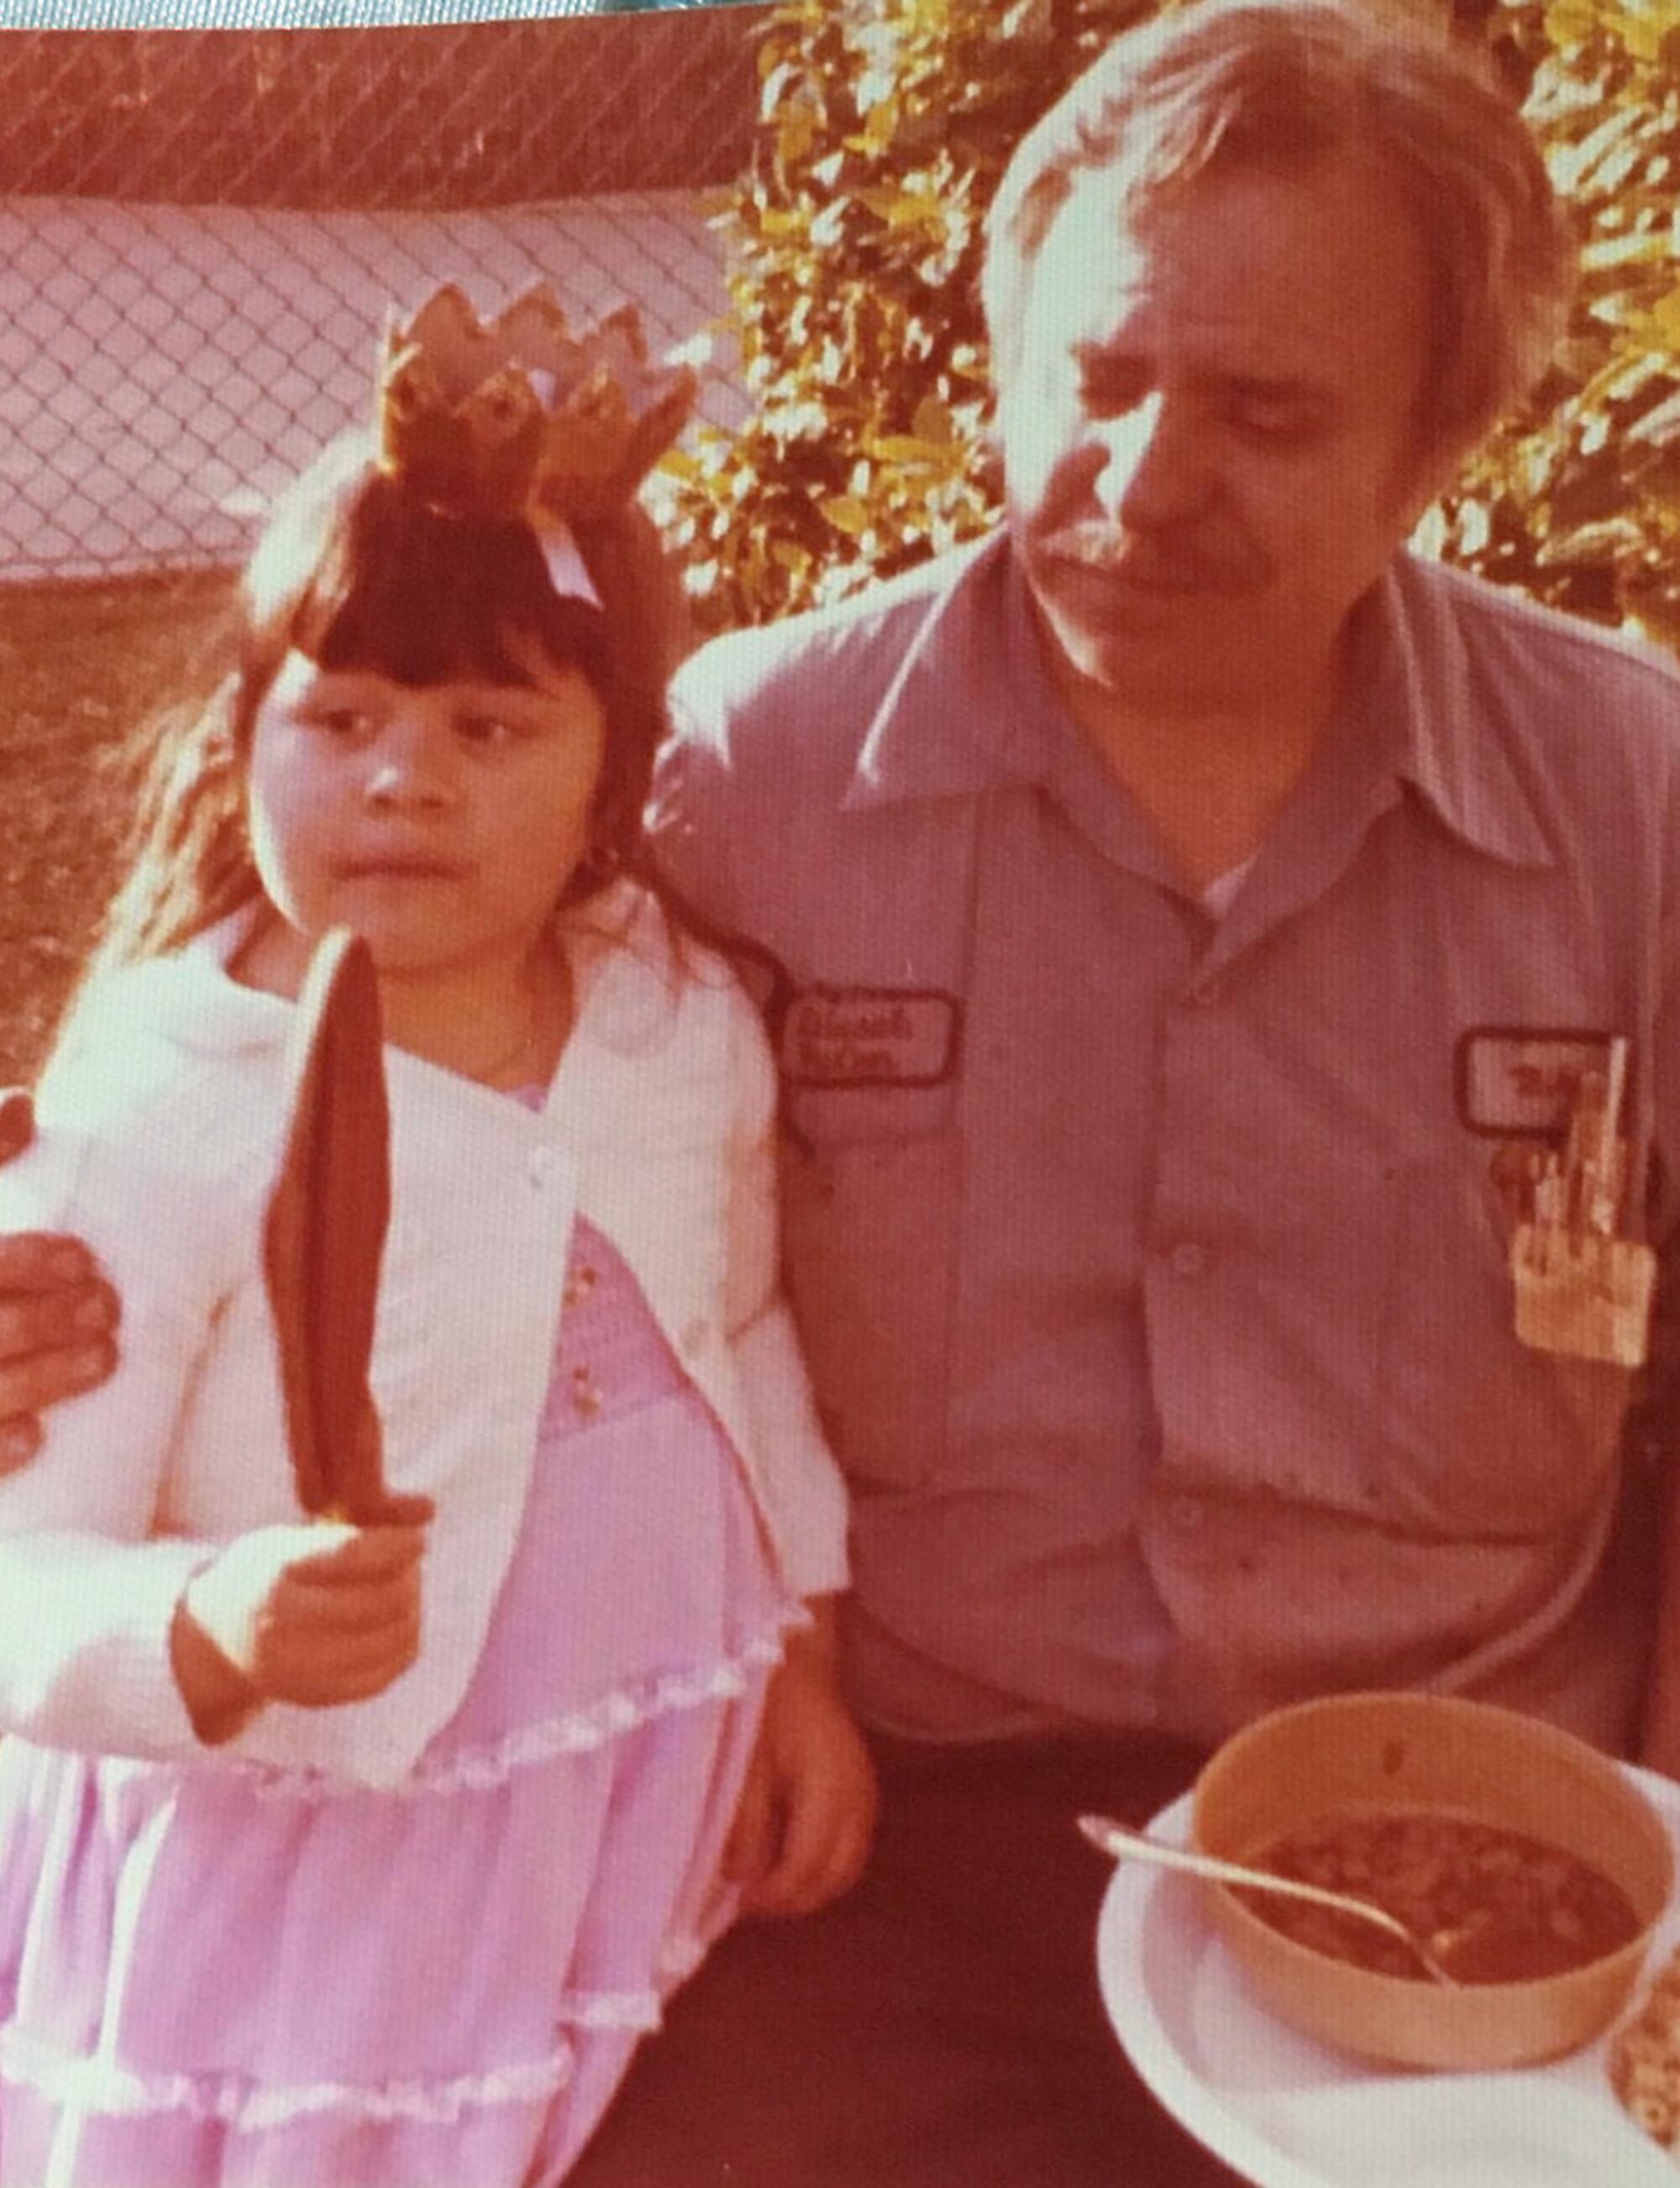 An old photo of a grandfather, right, with his arm around a young girl wearing a crown 